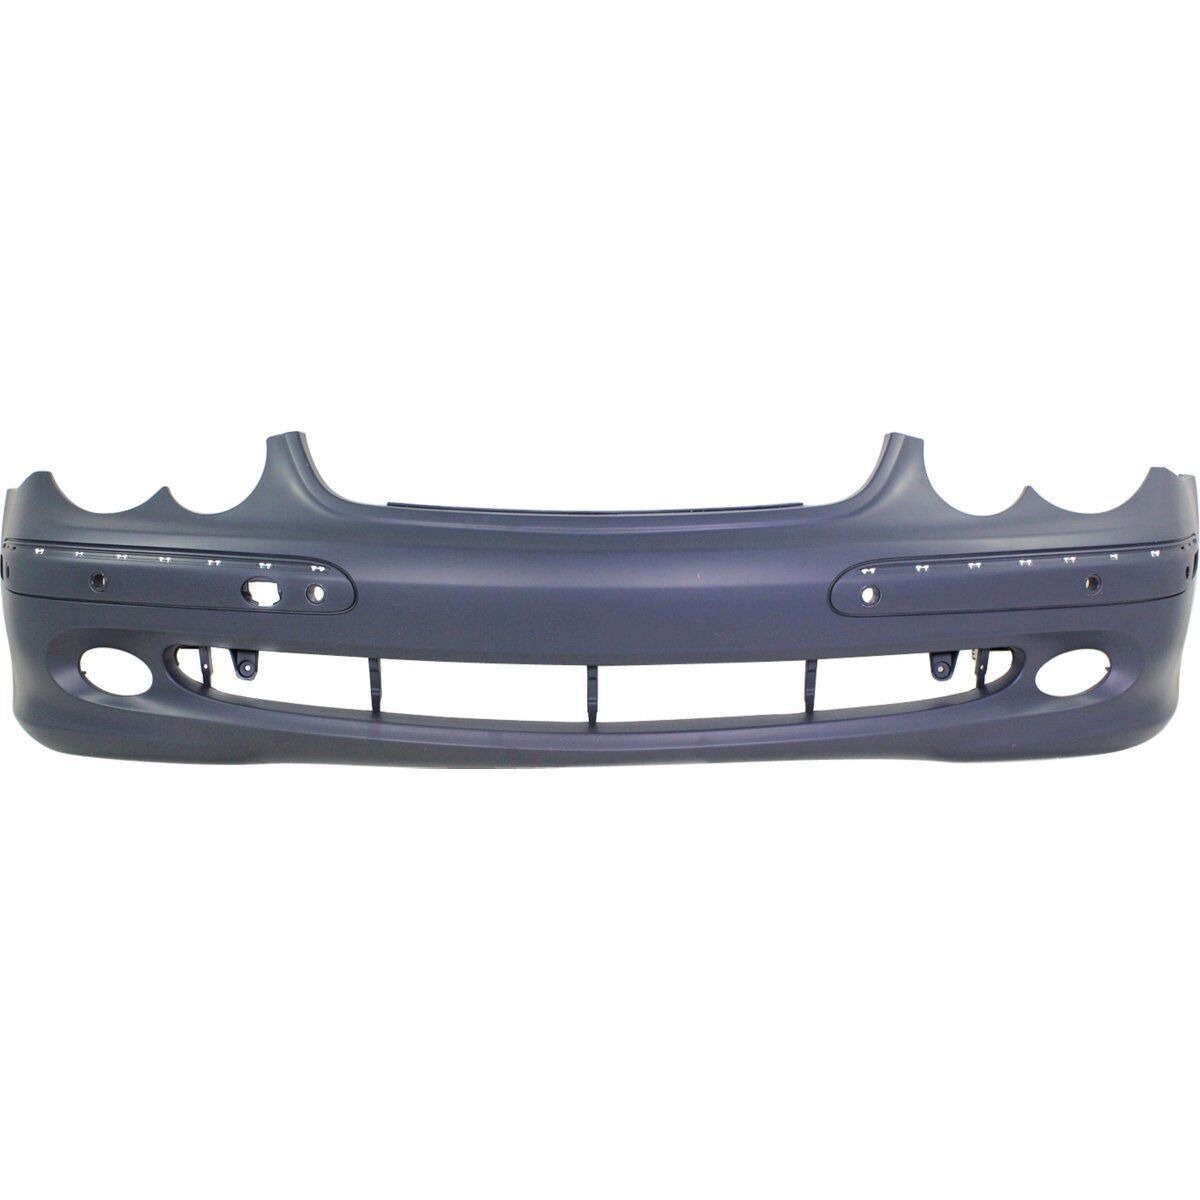 2003-2009 MERCEDES-BENZ CLK-CLASS; Front Bumper Cover; W209 w/o HL Washer w/Parktronic w/o Sport Painted to Match